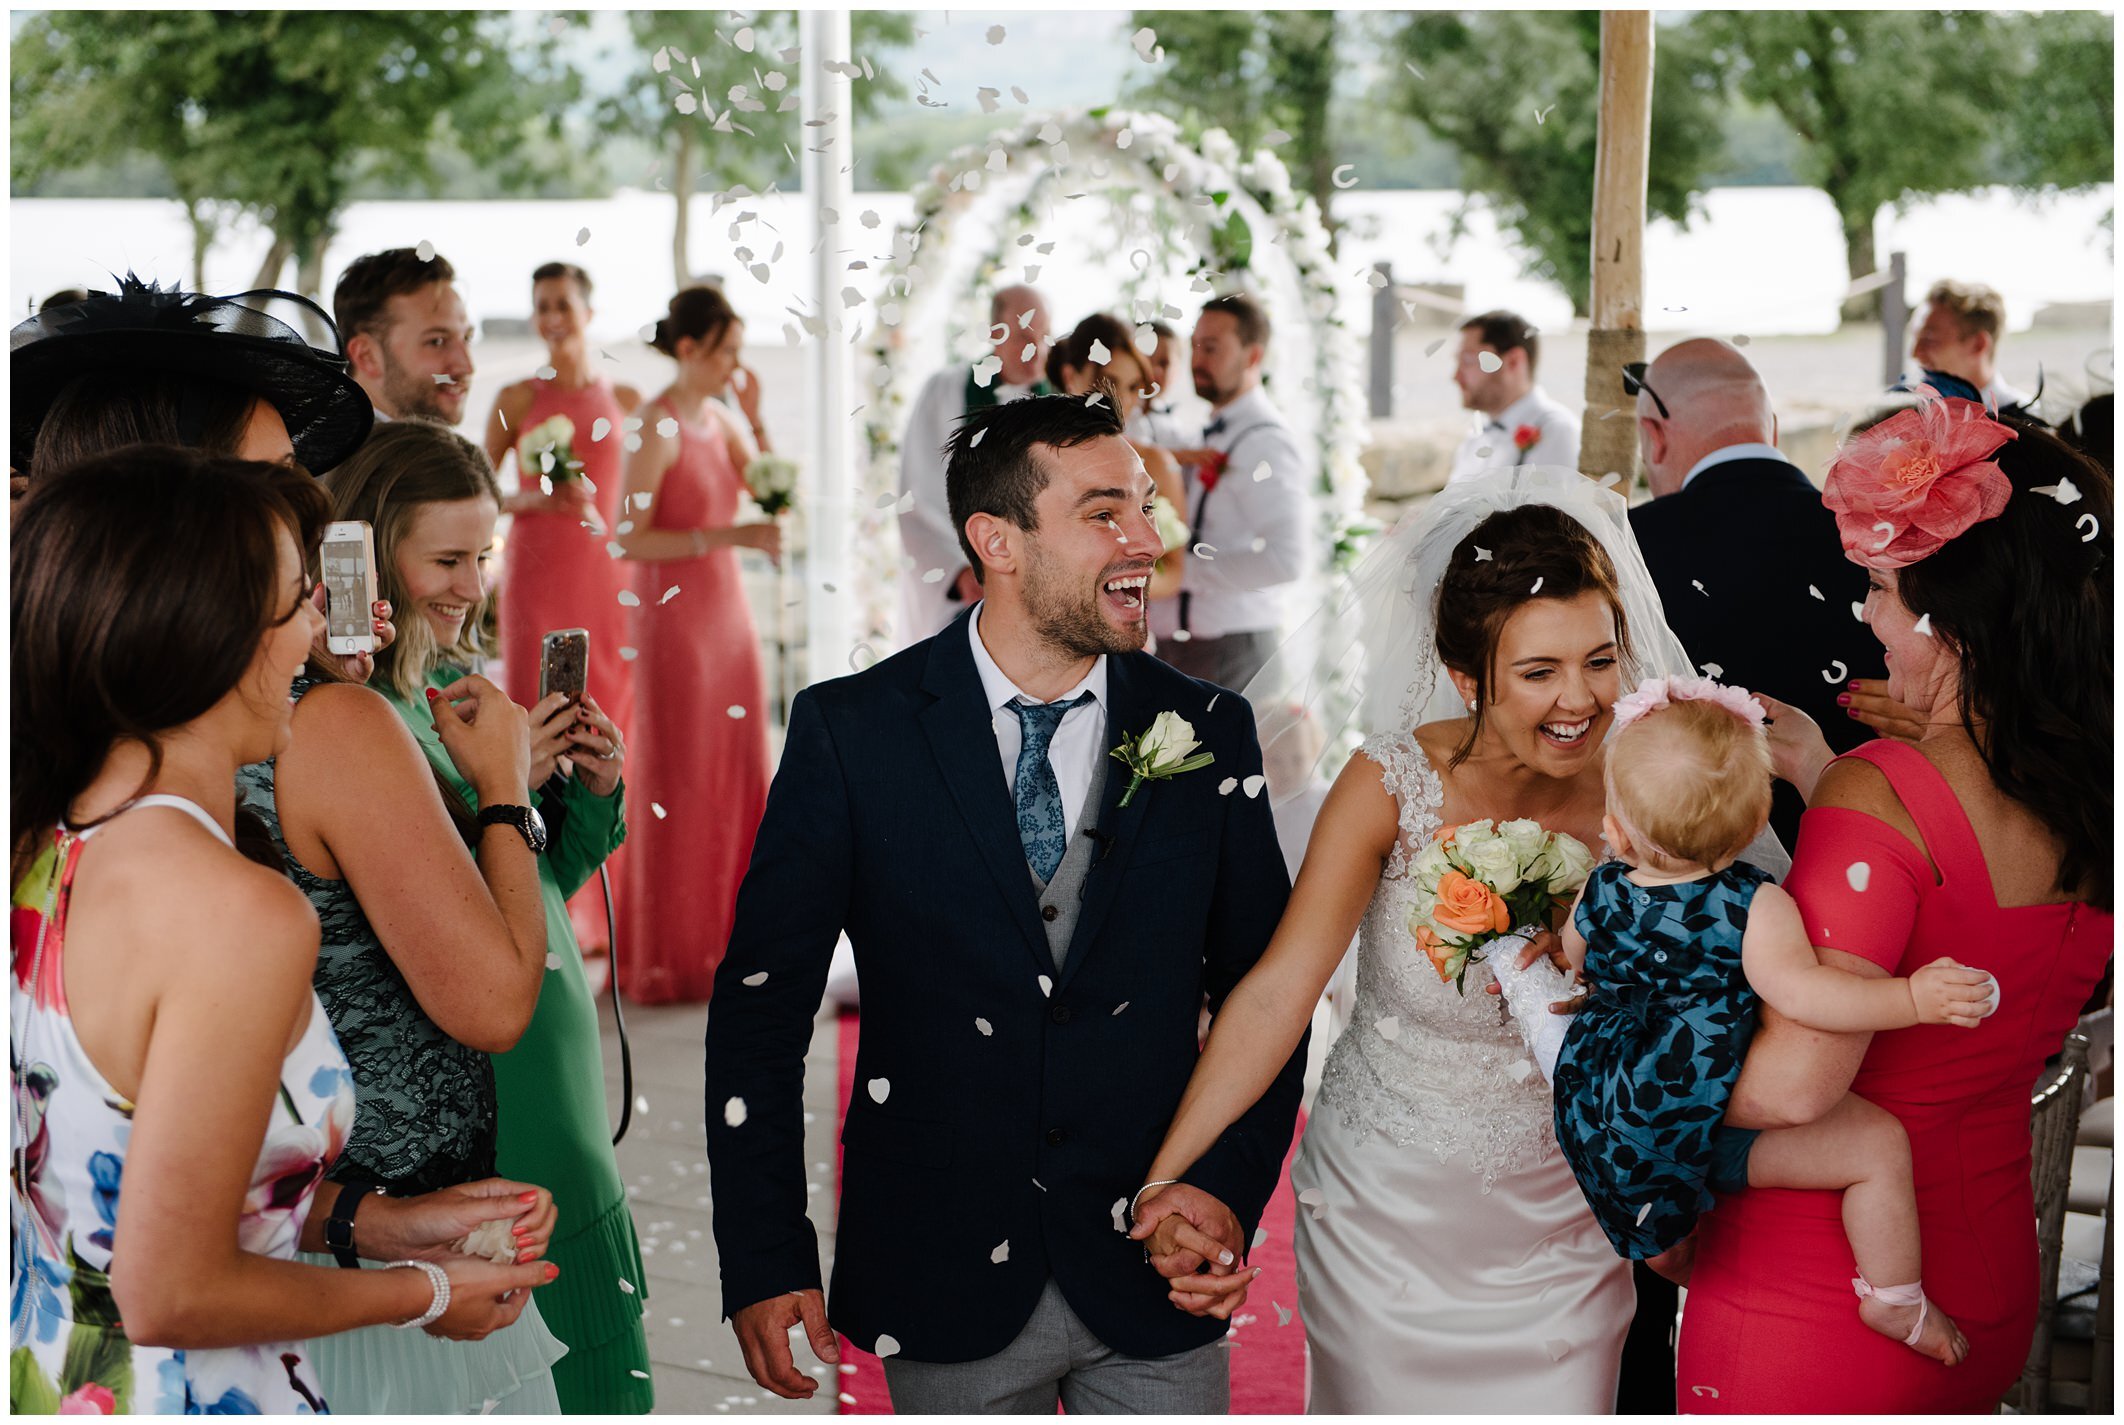 Lynsey_Andy_Rossharbour_Fermanagh_wedding_jude_browne_photography_0075.jpg